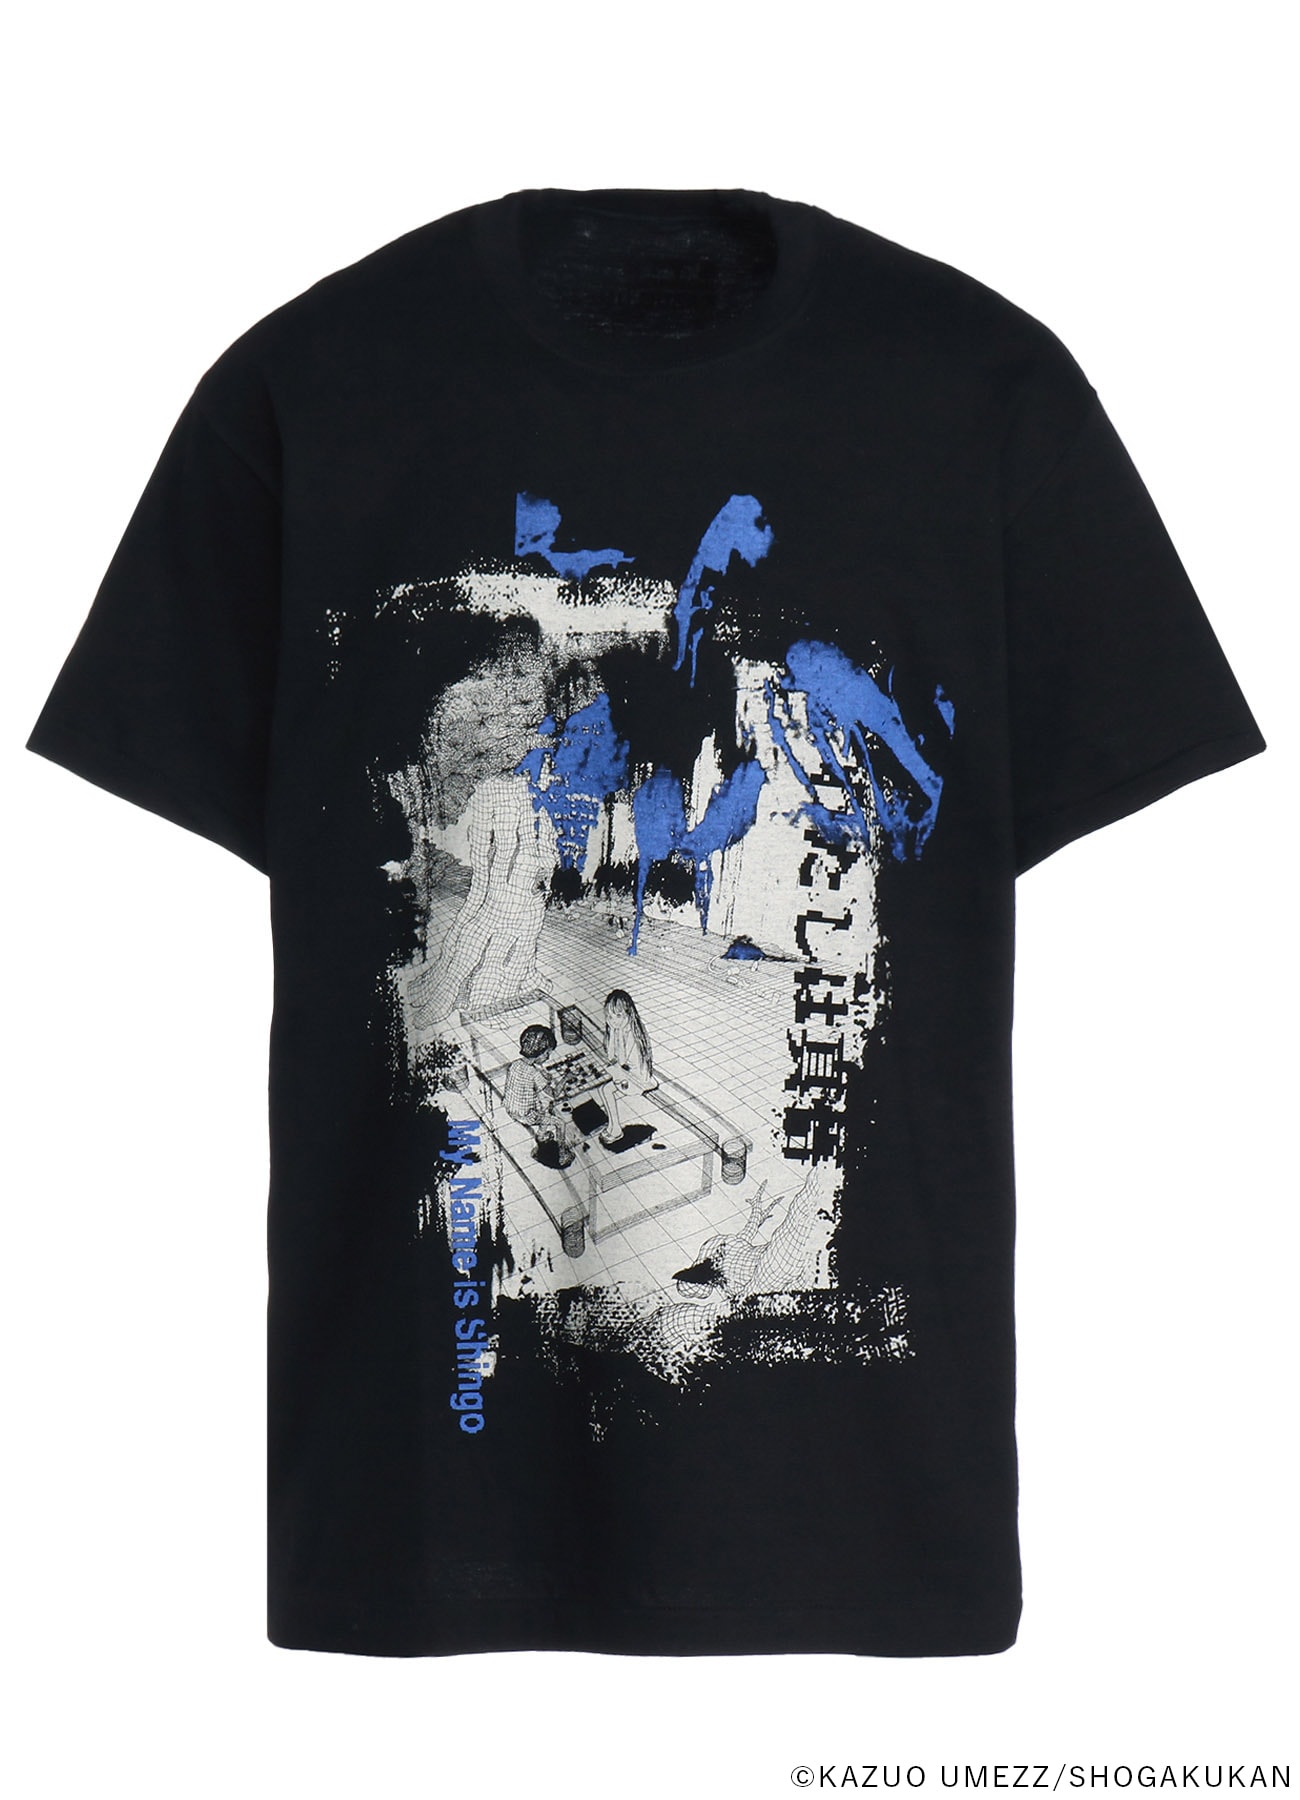 S'YTExKAZUO UMEZZ-MY NAME IS SHINGO- C/JERSEY T-SHIRT PRINTED WITH COMICS COVER ART”Cyber world”